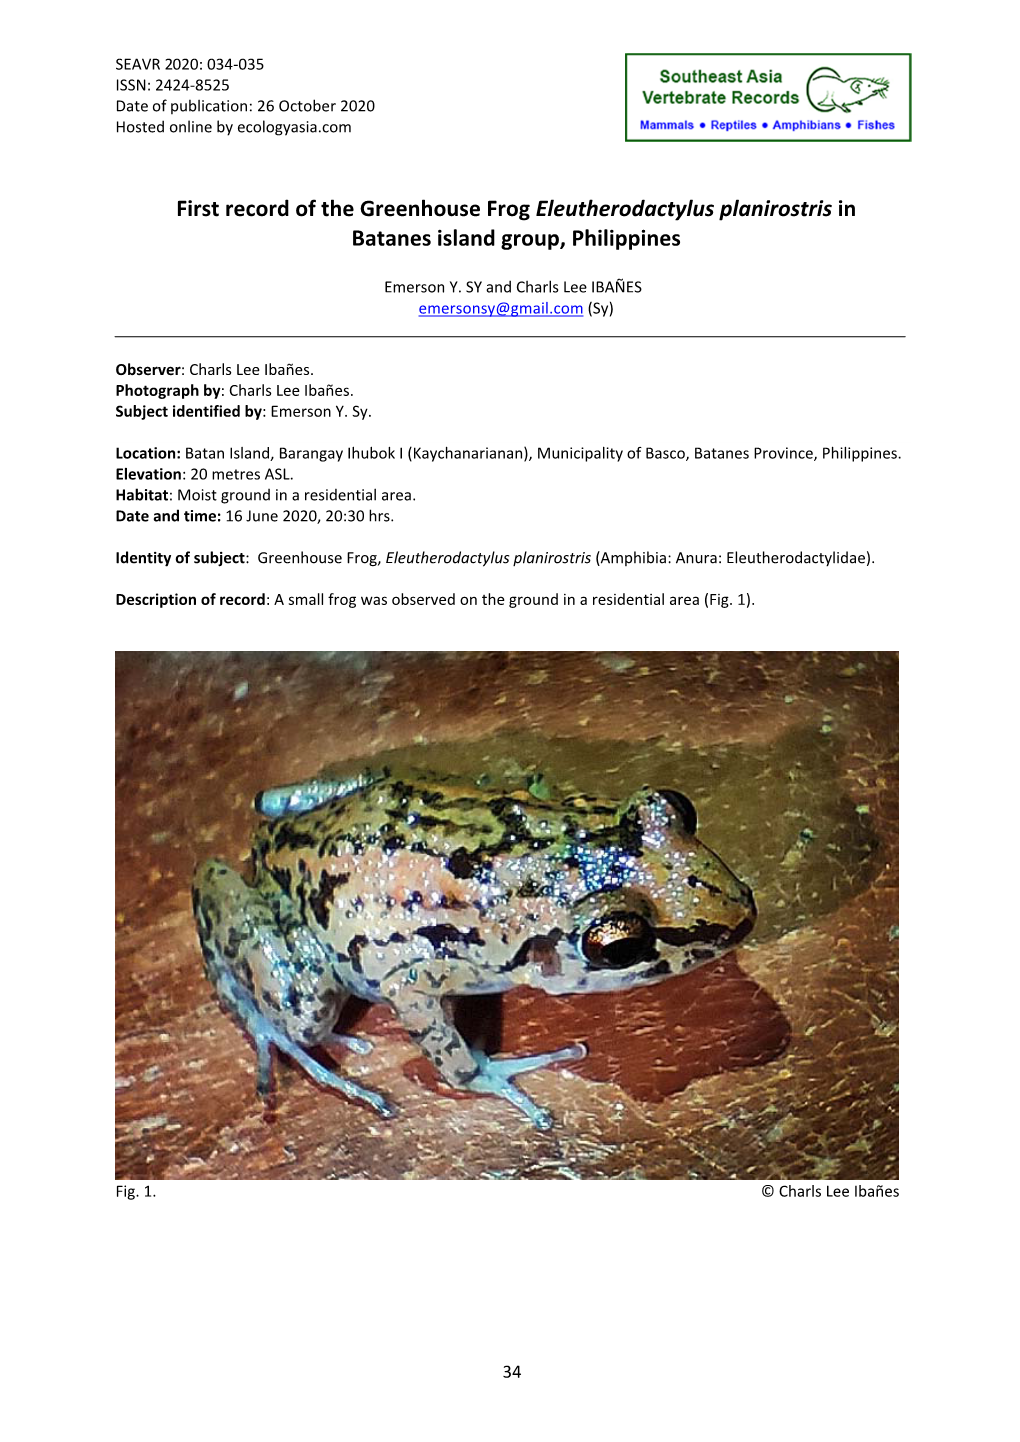 First Record of the Greenhouse Frog Eleutherodactylus Planirostris in Batanes Island Group, Philippines